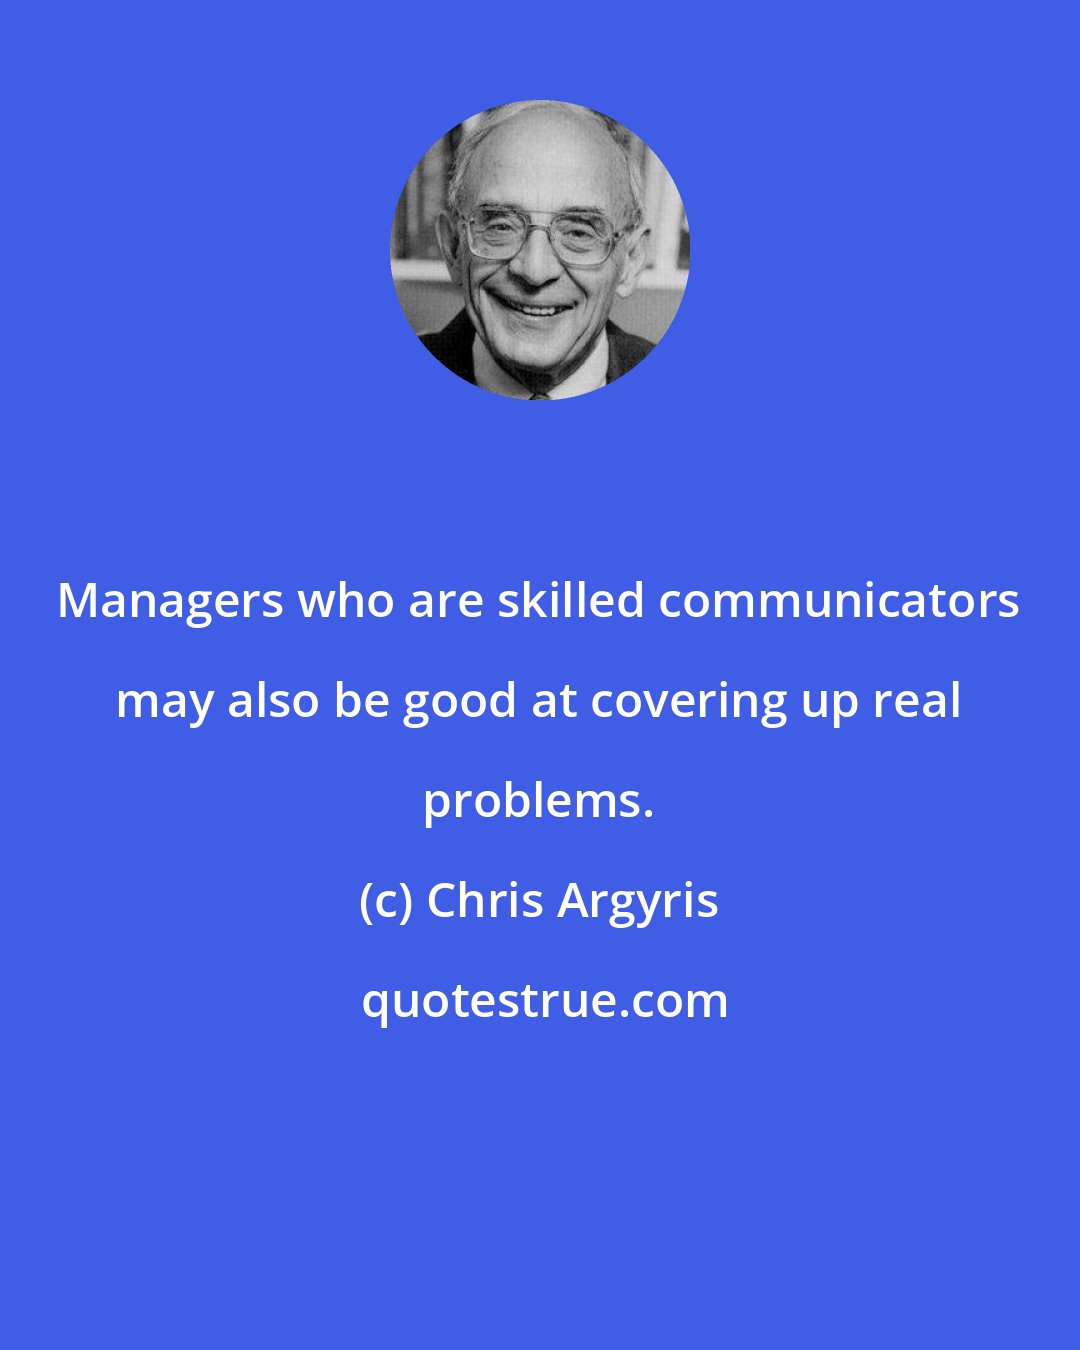 Chris Argyris: Managers who are skilled communicators may also be good at covering up real problems.